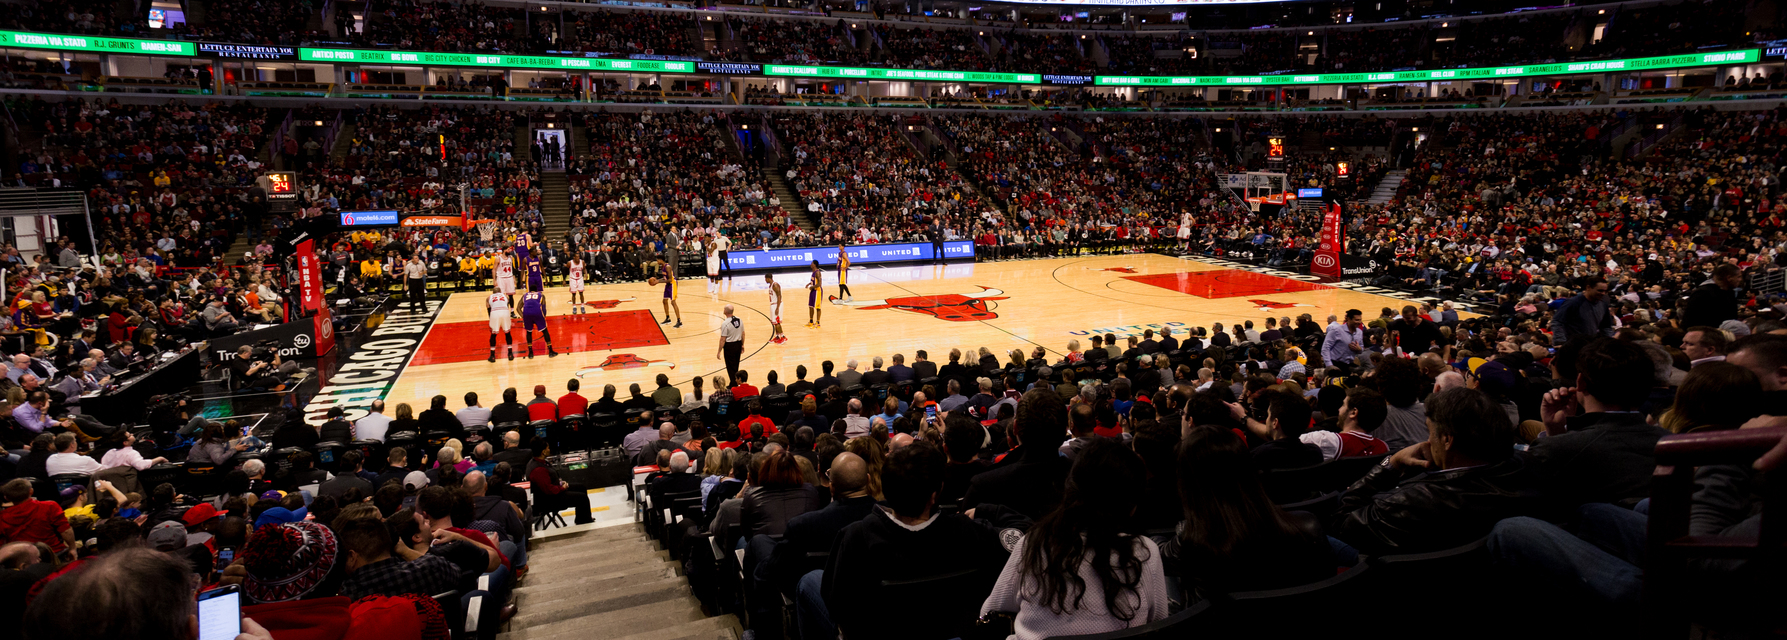 How Much Are Bulls Tickets? 2019/20 Bulls Schedule and Tickets | Gametime